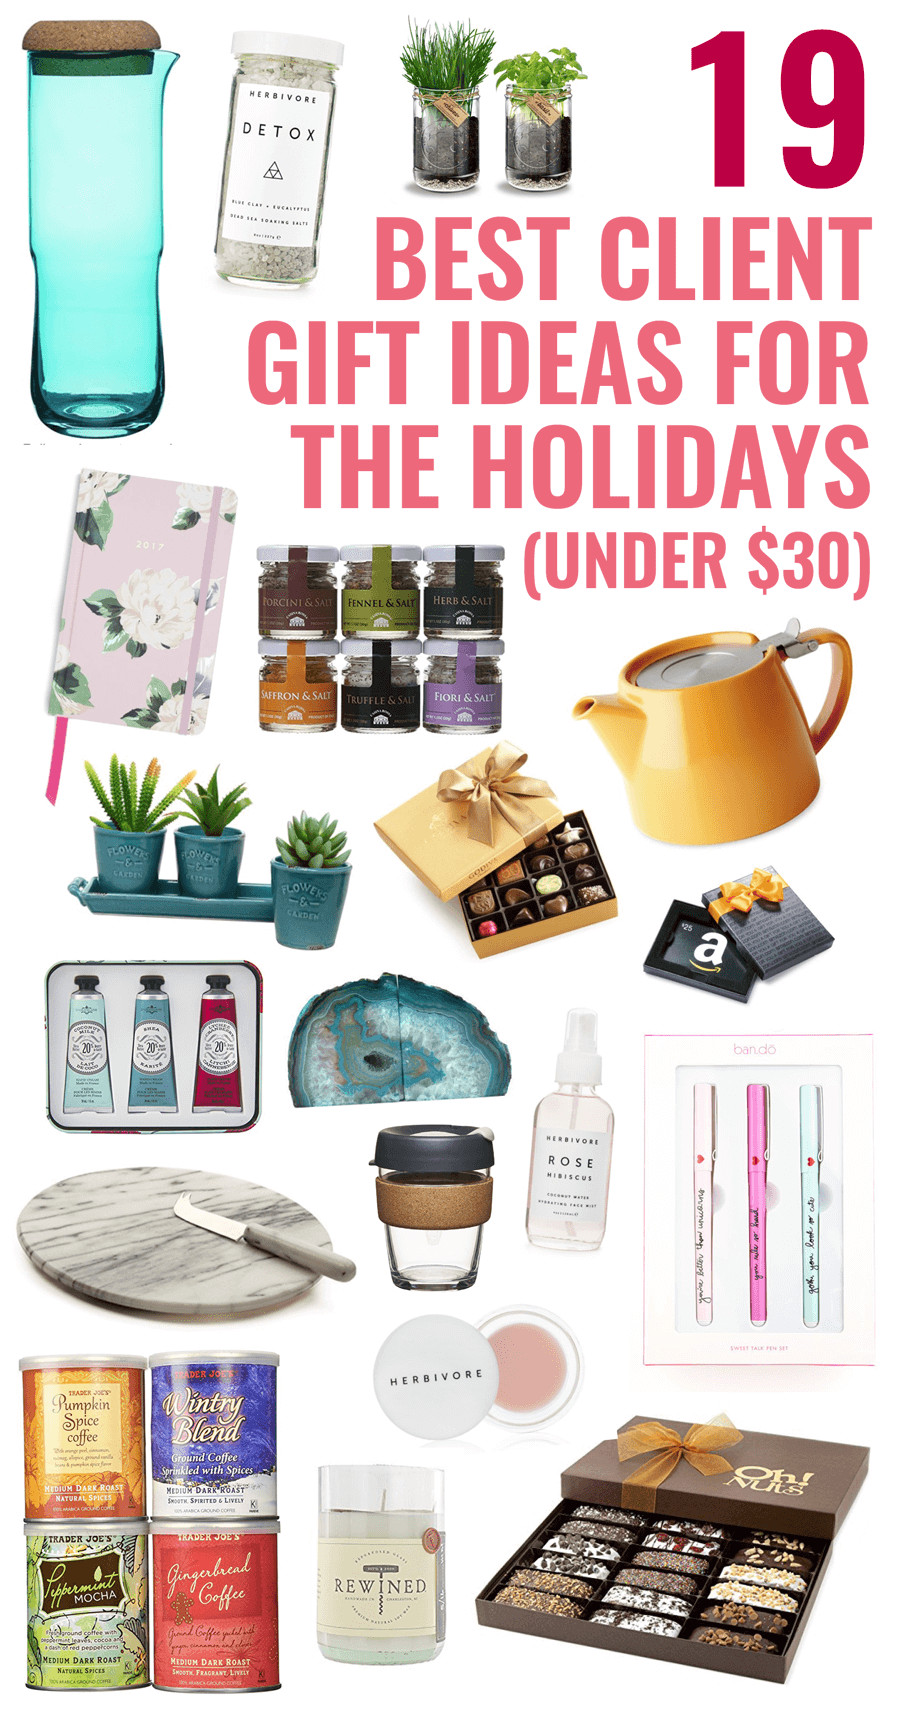 Gift Ideas For Couples Under 30
 19 Best Client Gift Ideas for the Holidays under $30